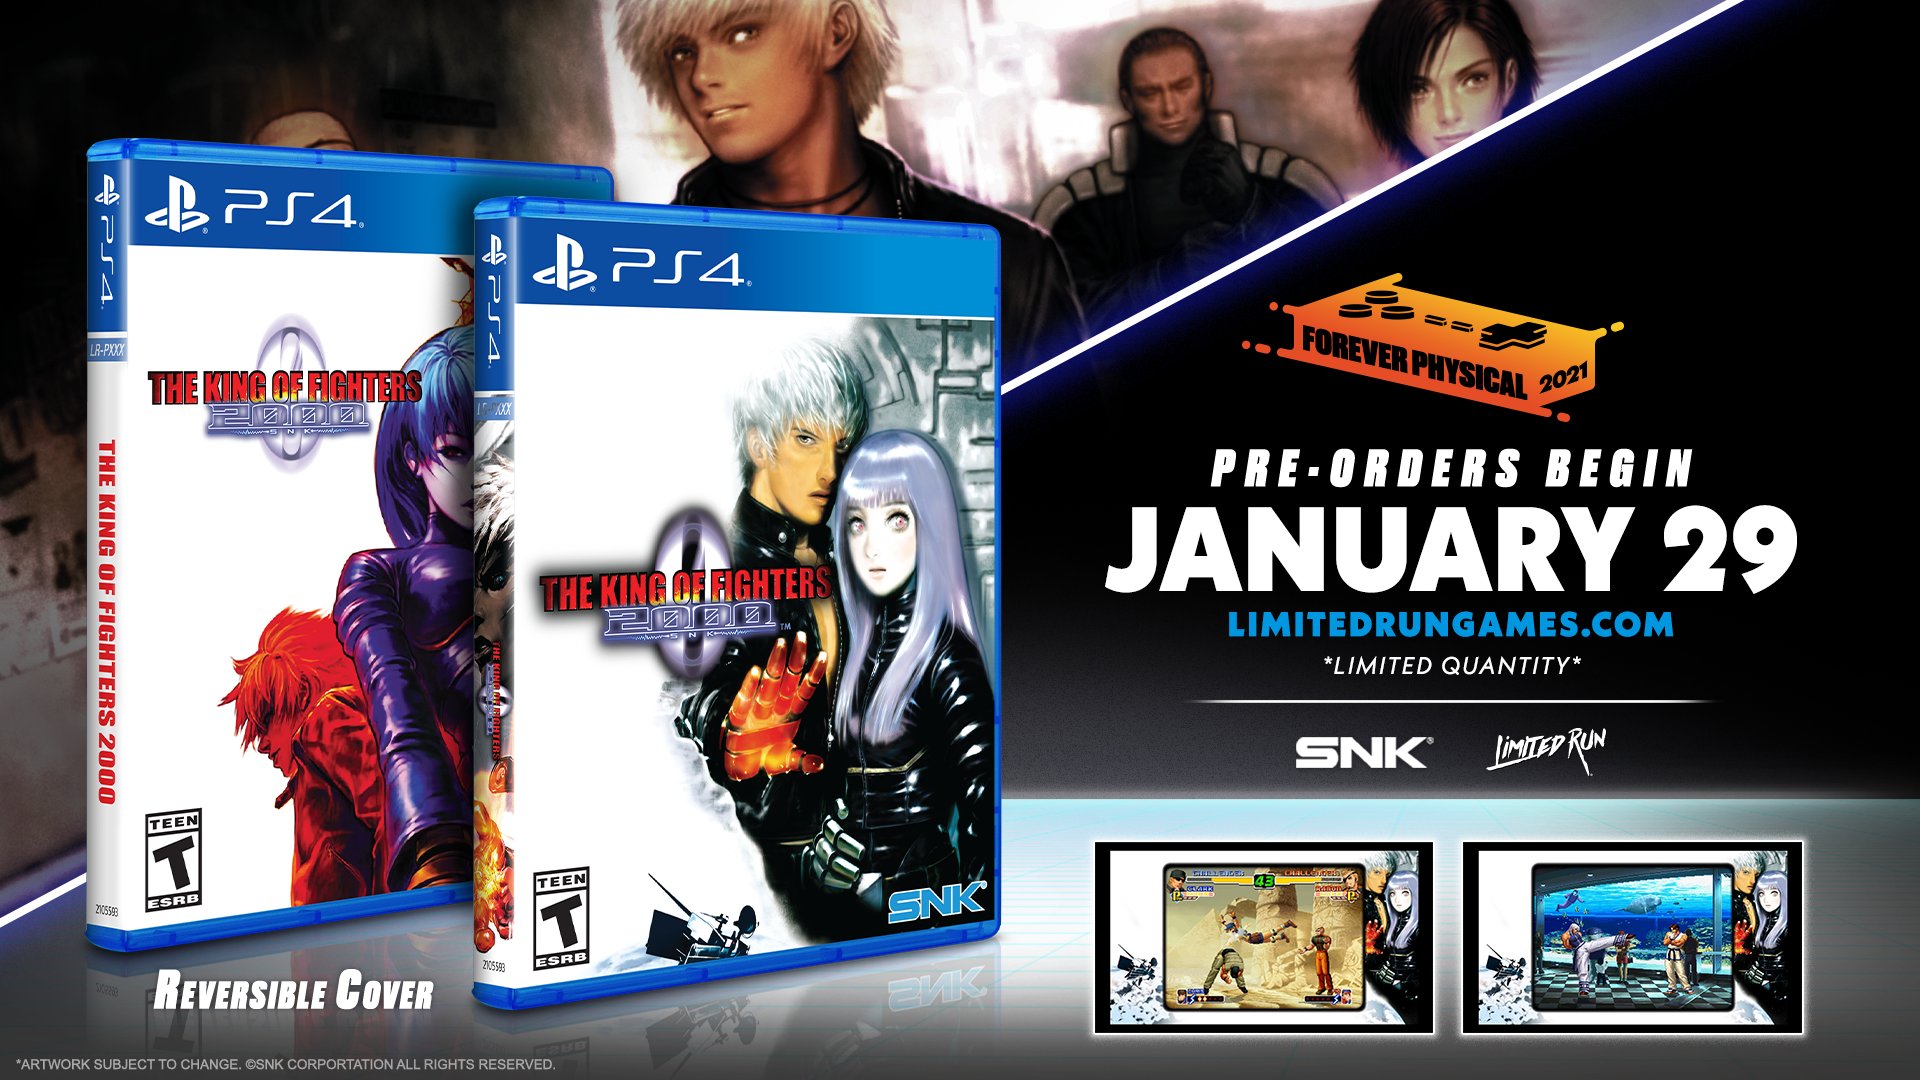 King ps4. The King of Fighters 2000. For the King ps4. Limited Run games. The King of Fighters 2000 ps4 Cover.